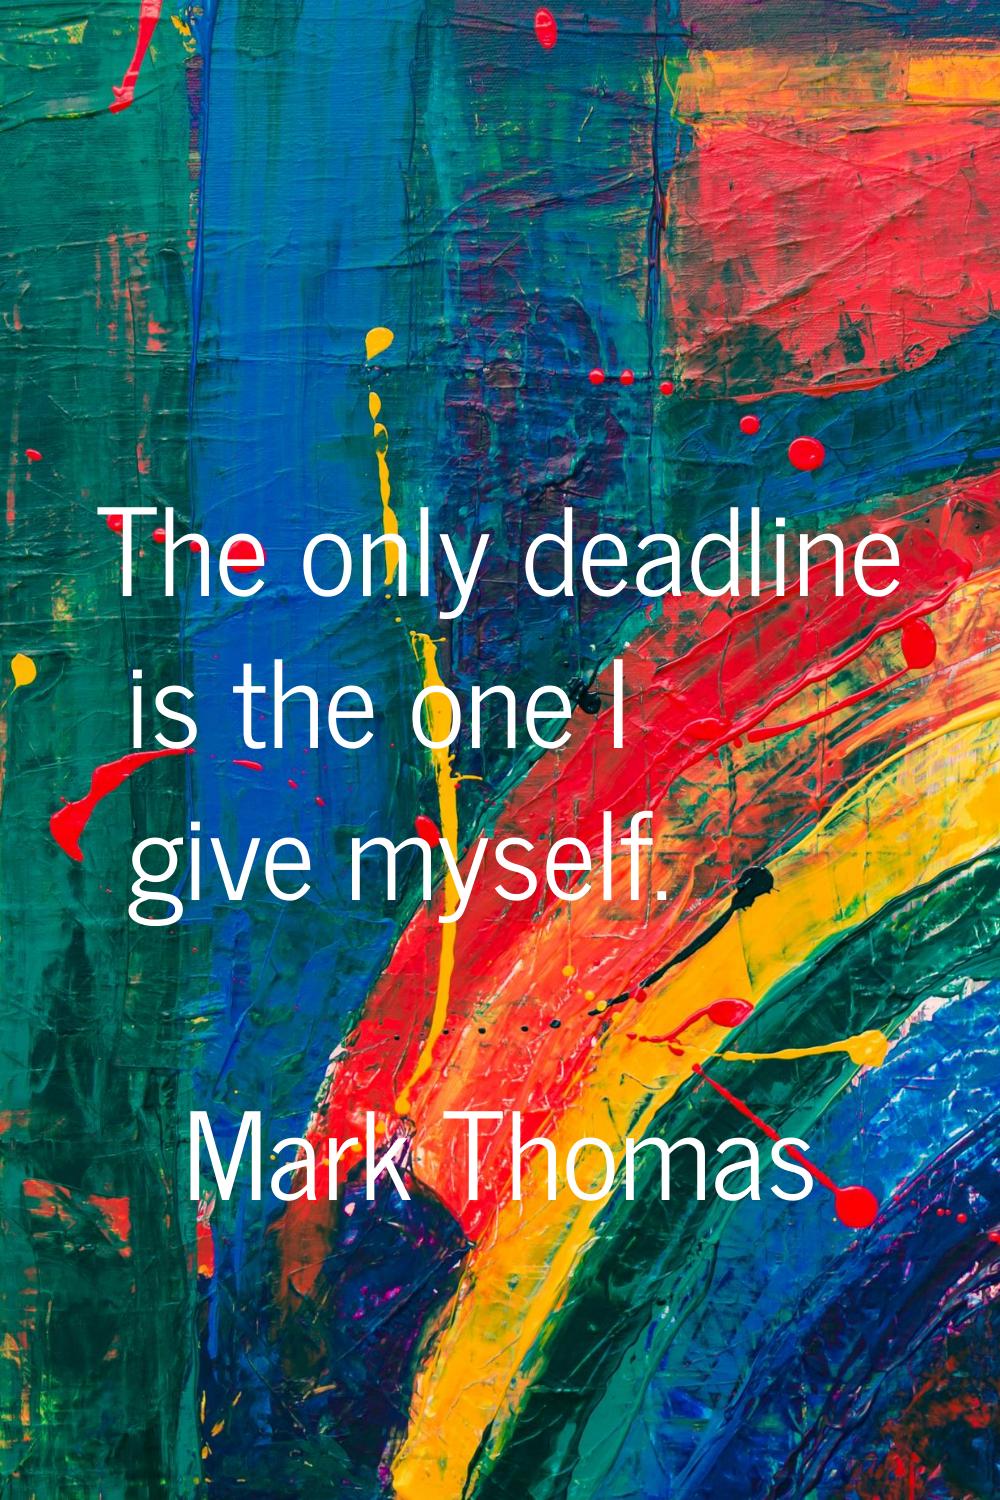 The only deadline is the one I give myself.